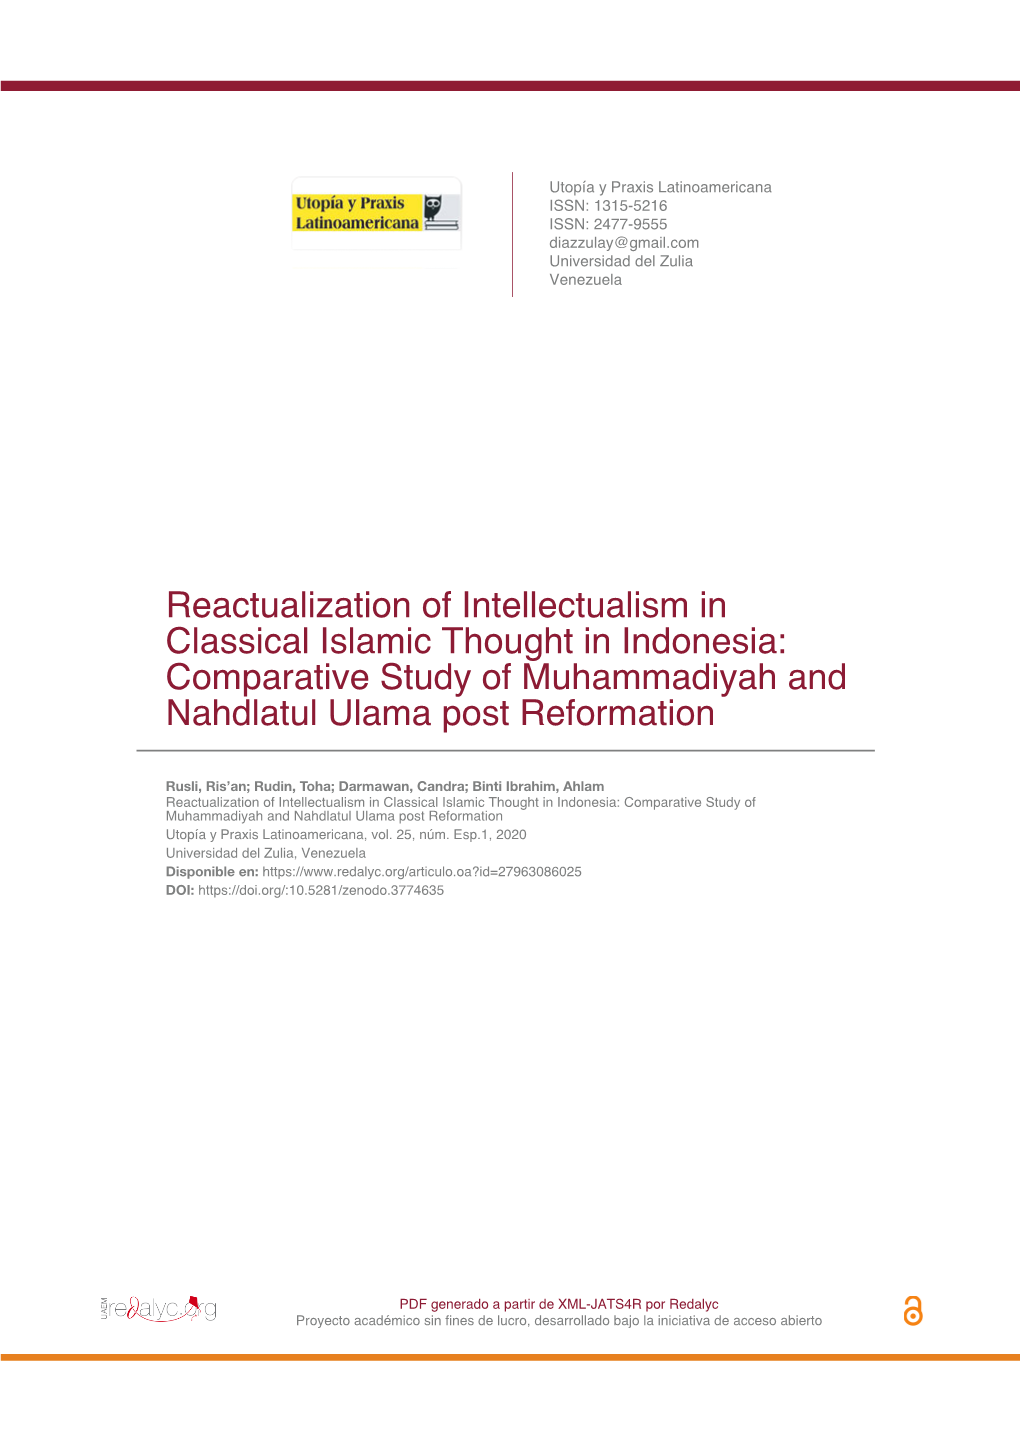 Reactualization of Intellectualism in Classical Islamic Thought in Indonesia: Comparative Study of Muhammadiyah and Nahdlatul Ulama Post Reformation